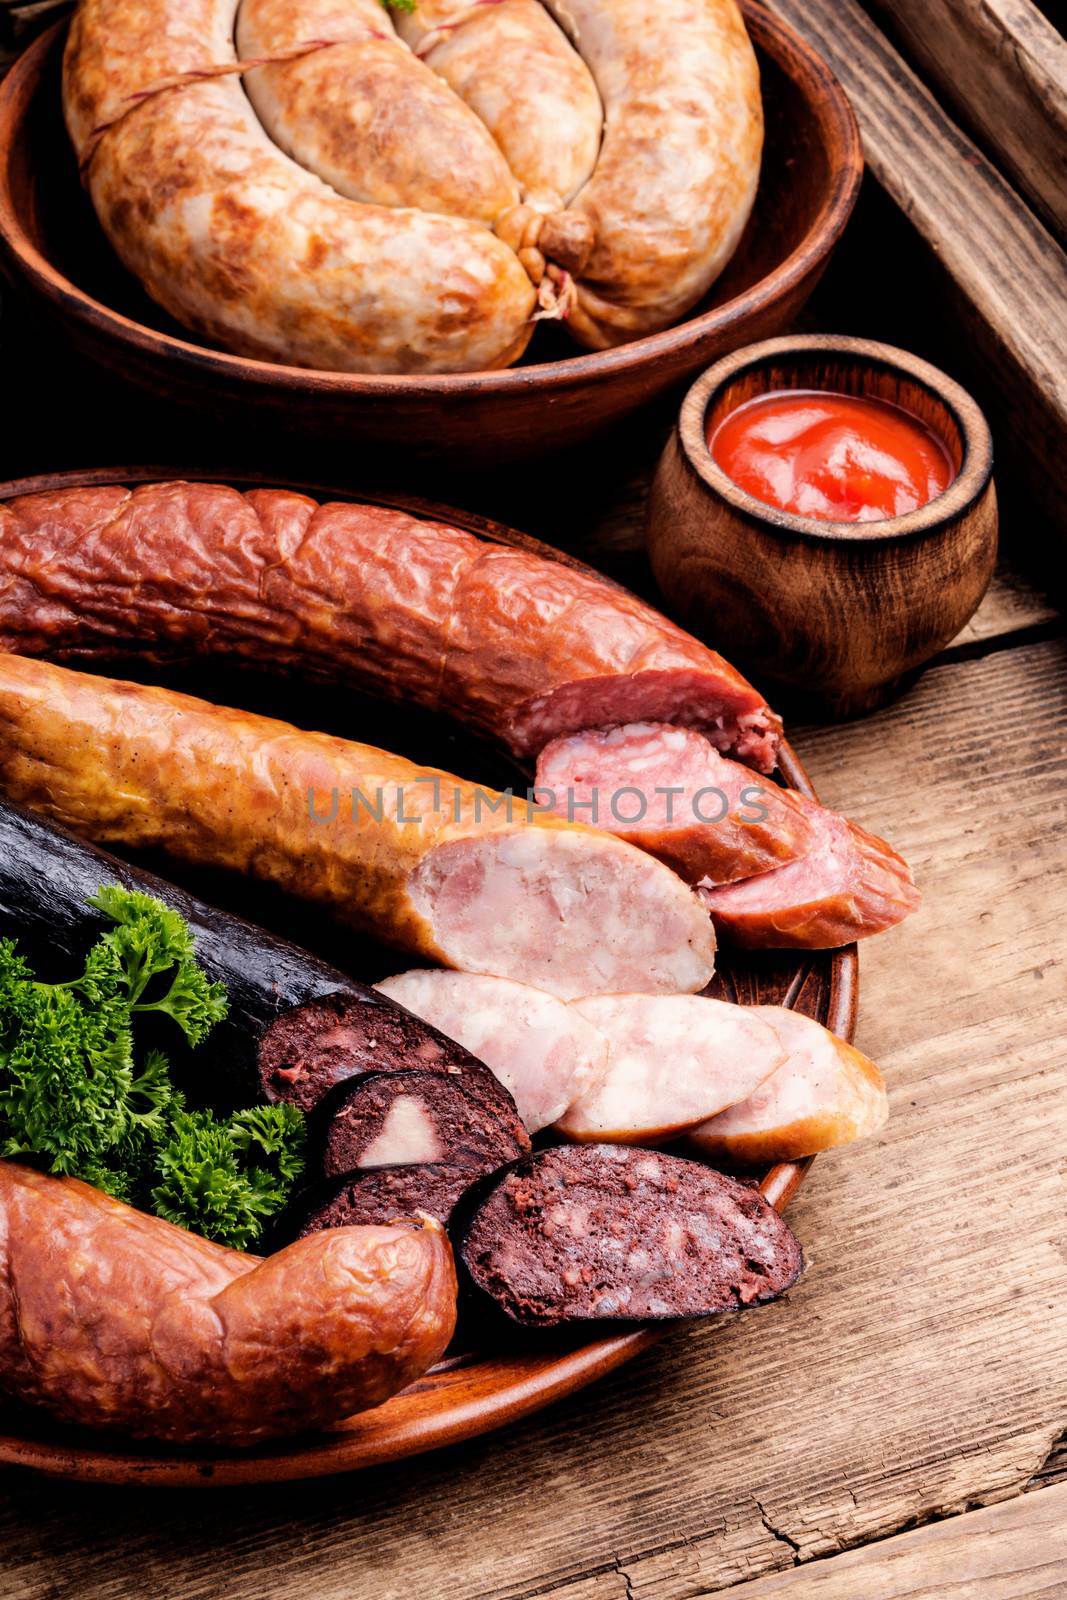 Smoked salami on old wooden table by LMykola